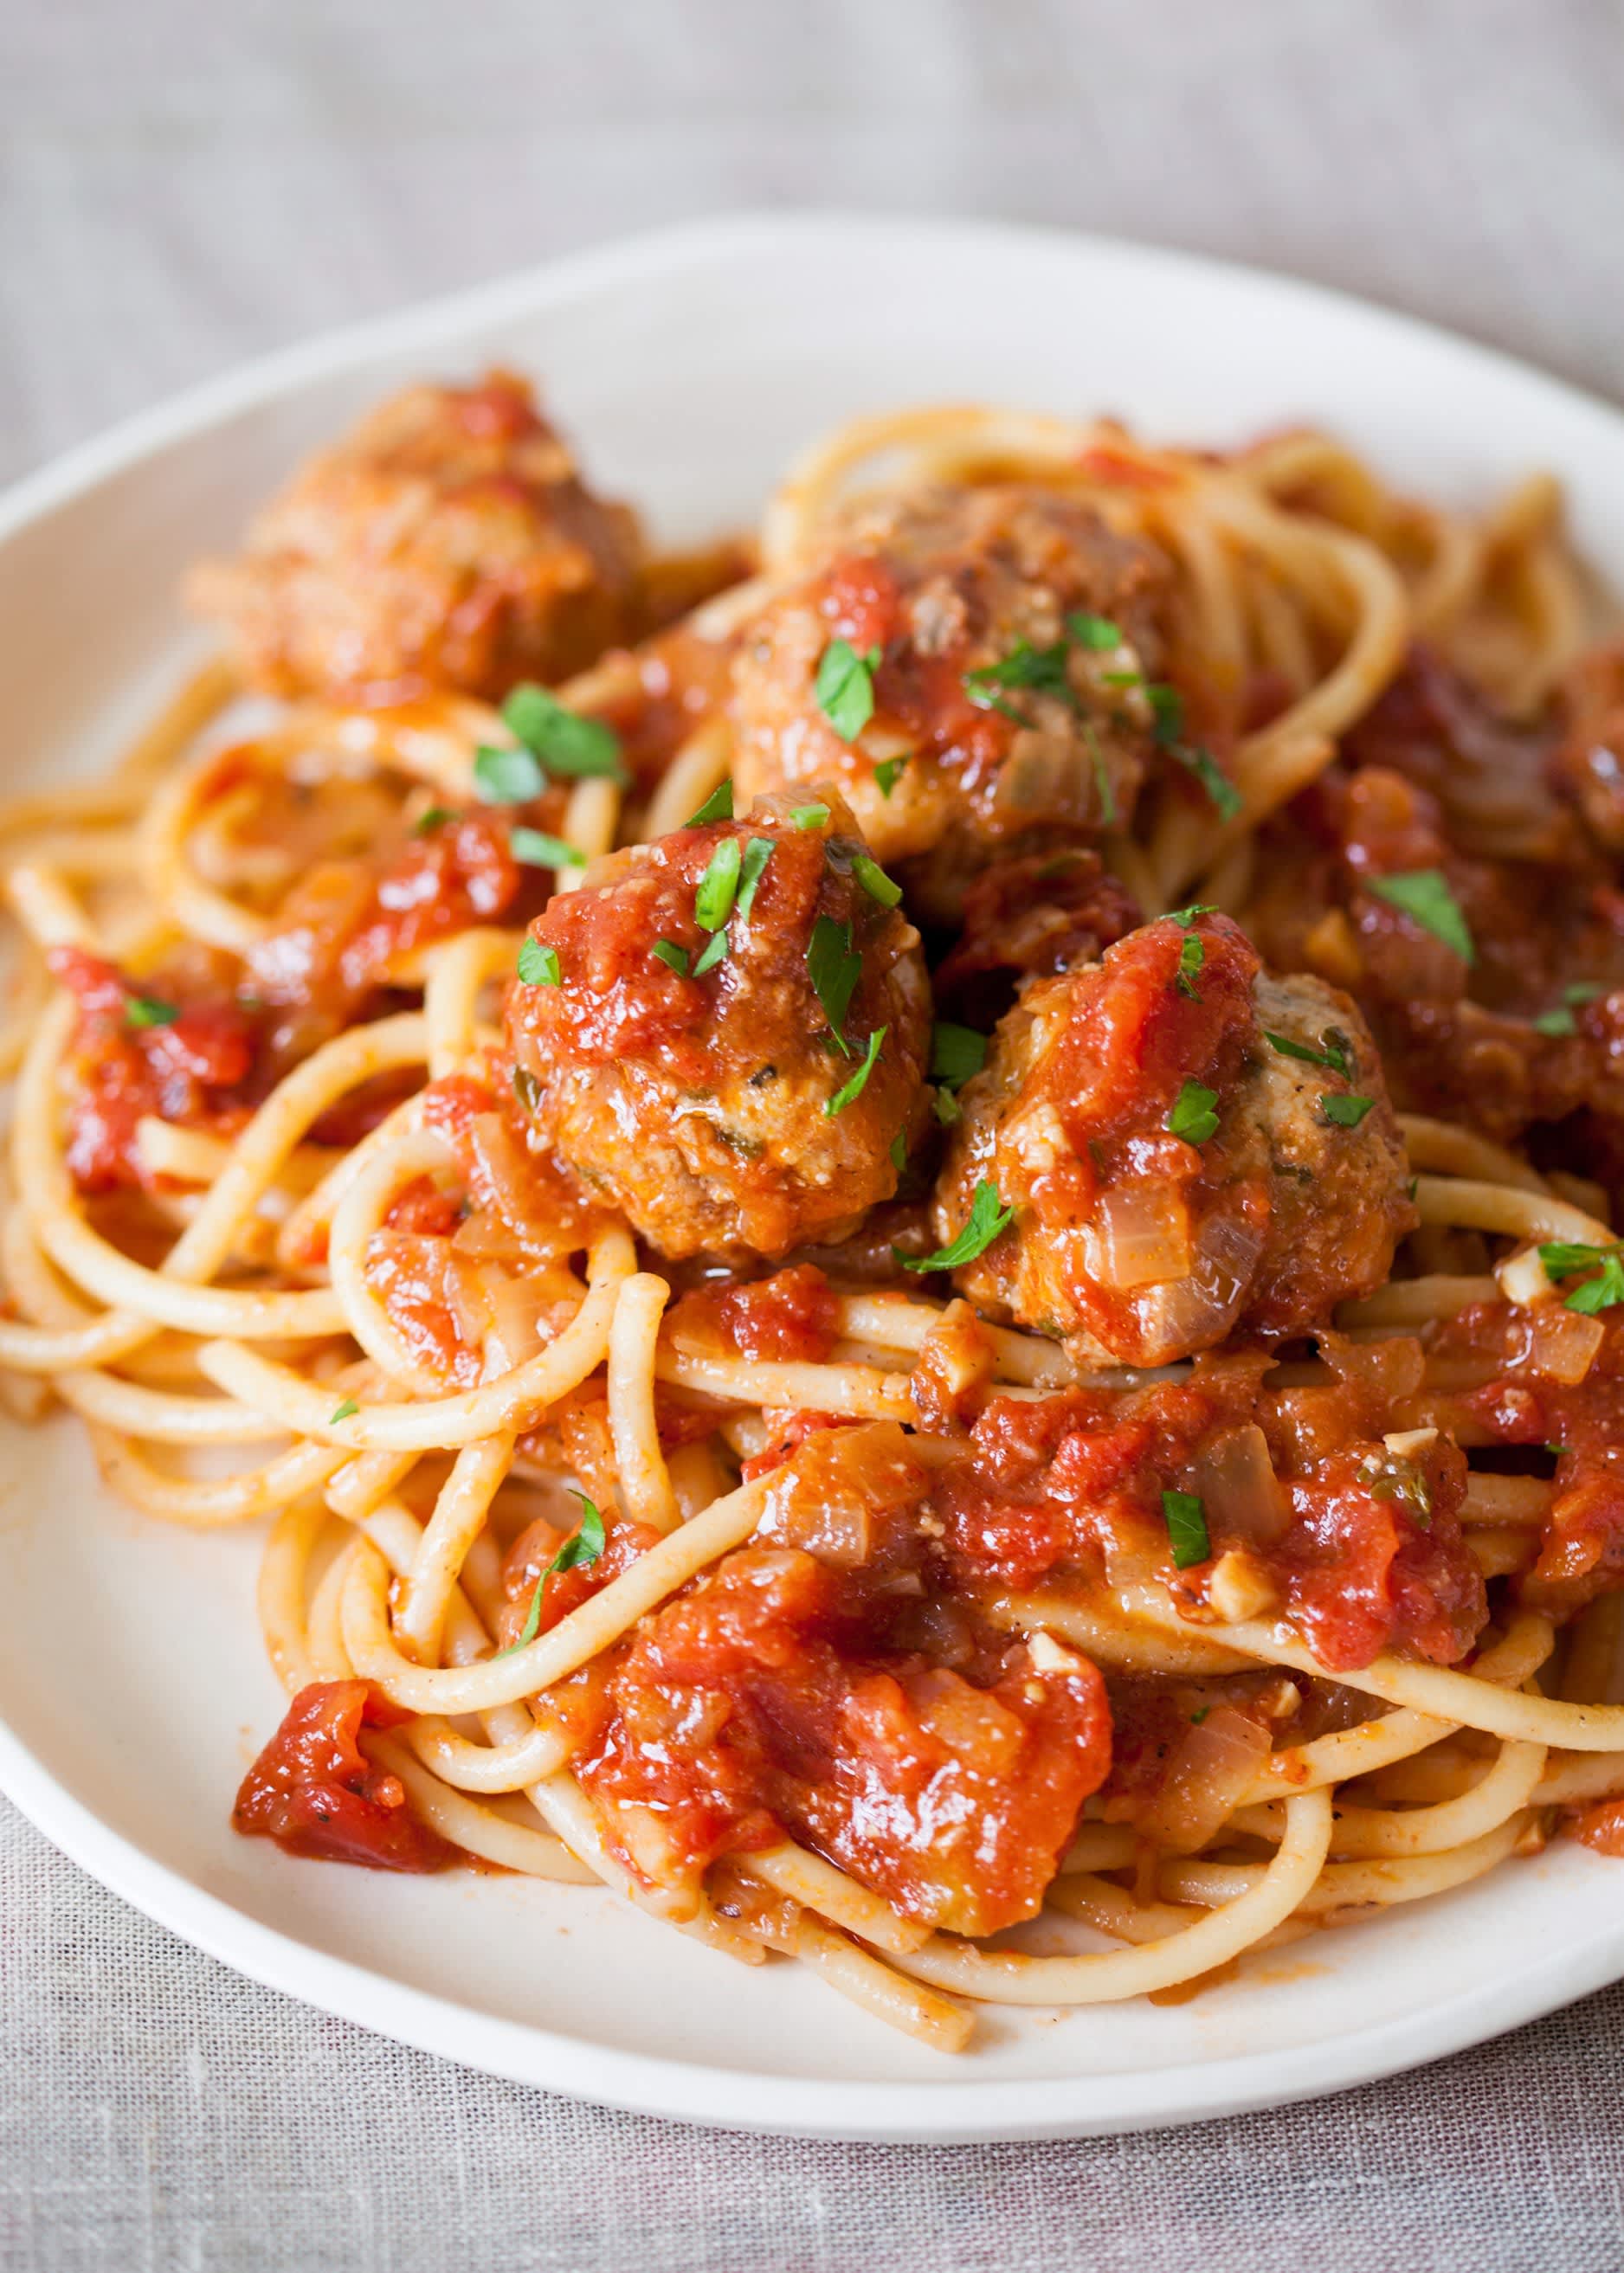 How To Make Meatballs: The Easiest, Simplest Method | Kitchn